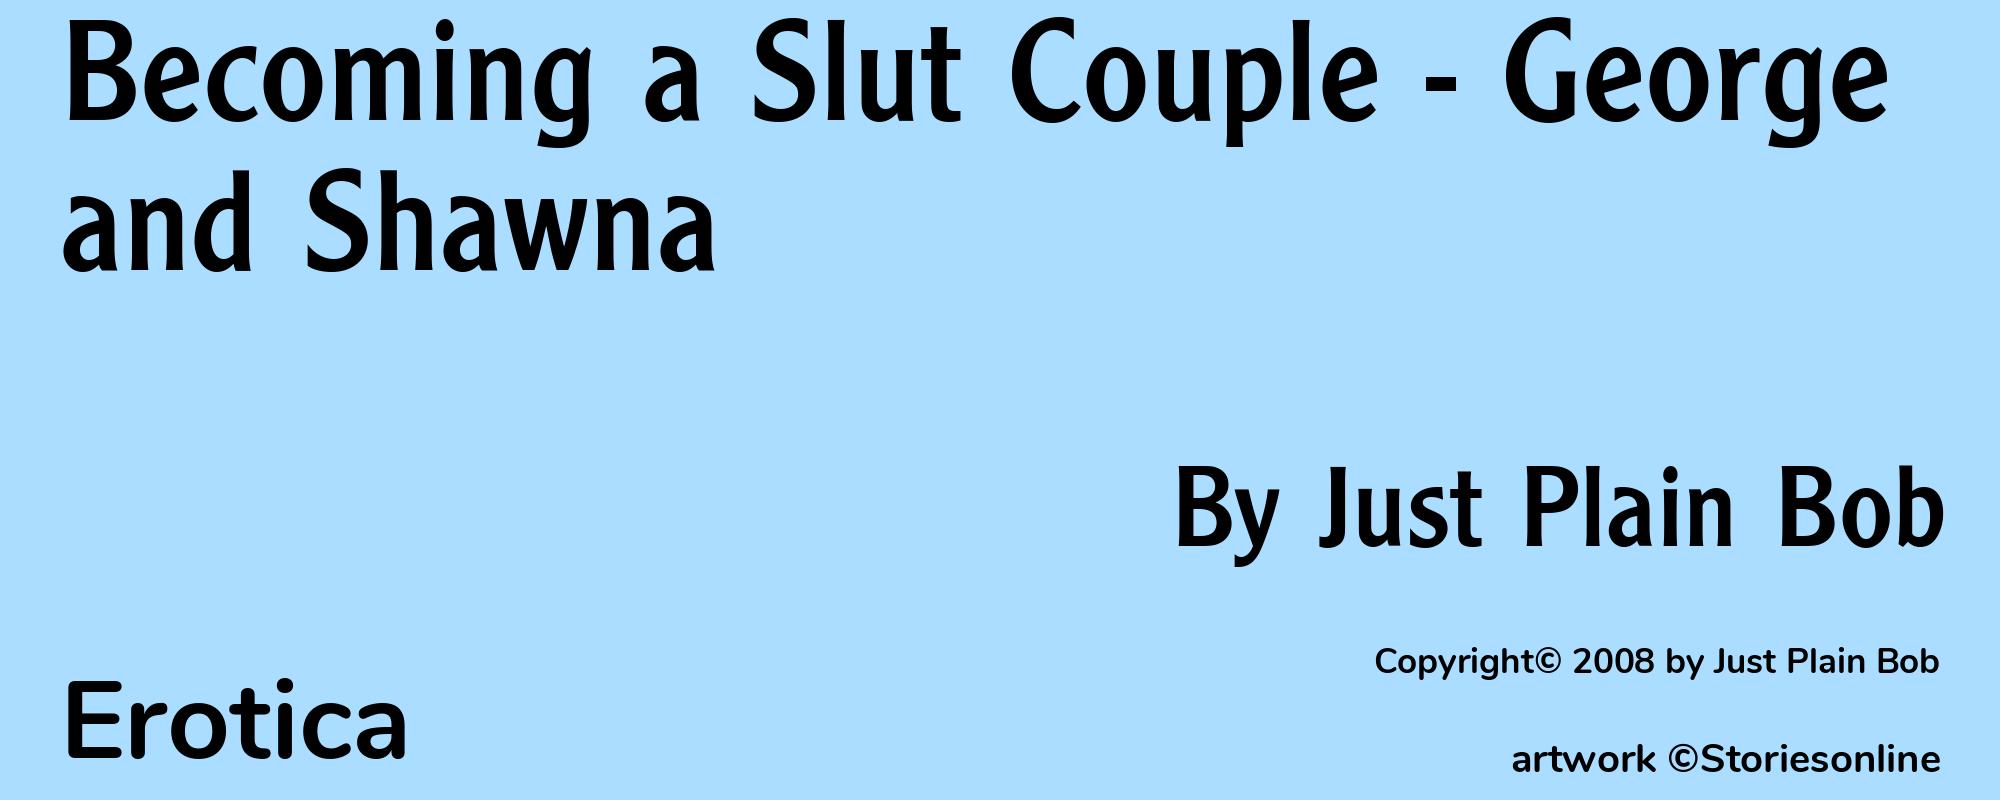 Becoming a Slut Couple - George and Shawna - Cover